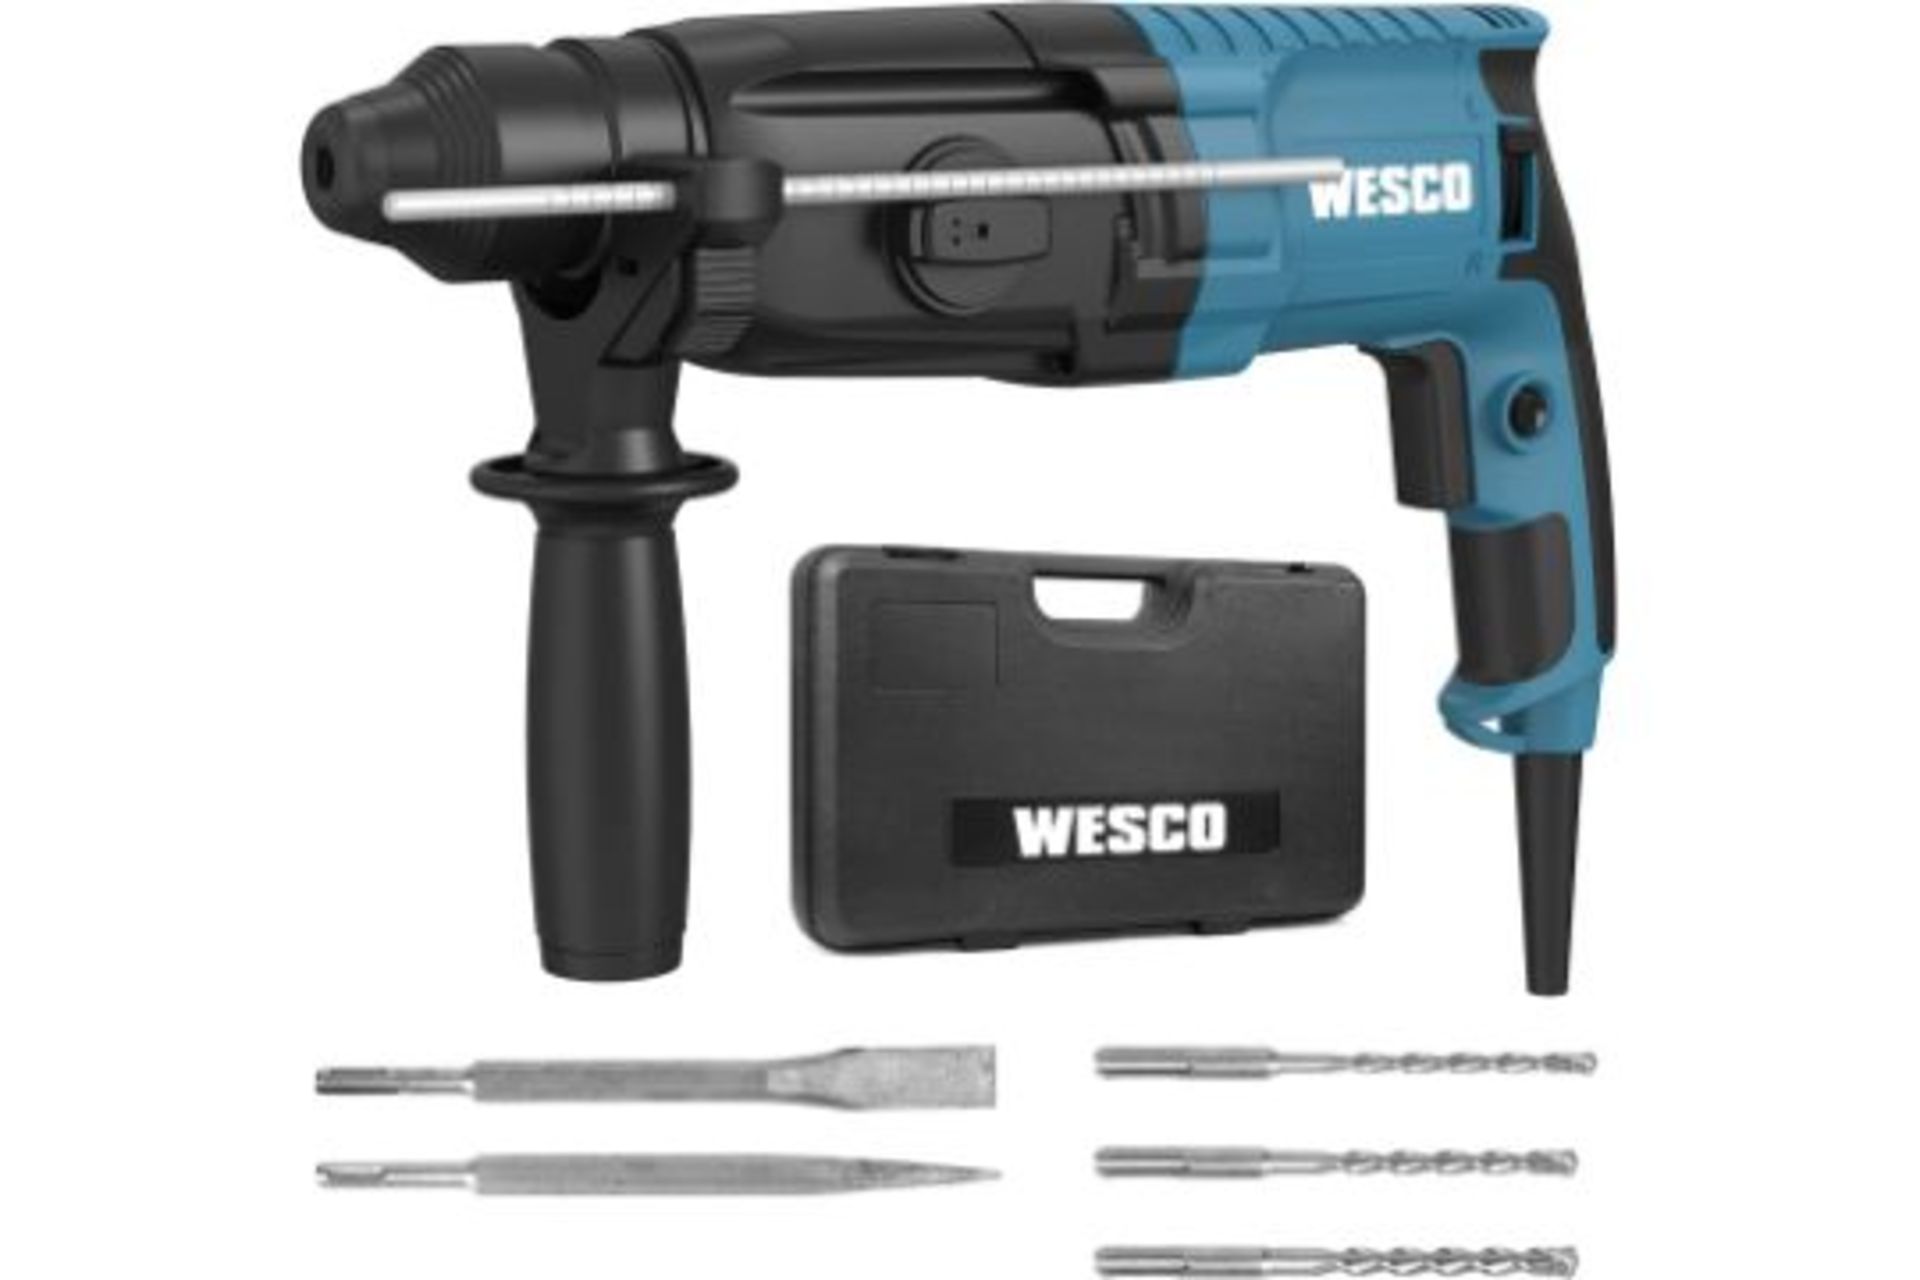 NEW BOXED WESCO 800W SDS Plus Rotary Hammer Drill, 3 Modes in 1, 2.8J Impact Energy, Variable-Speed,